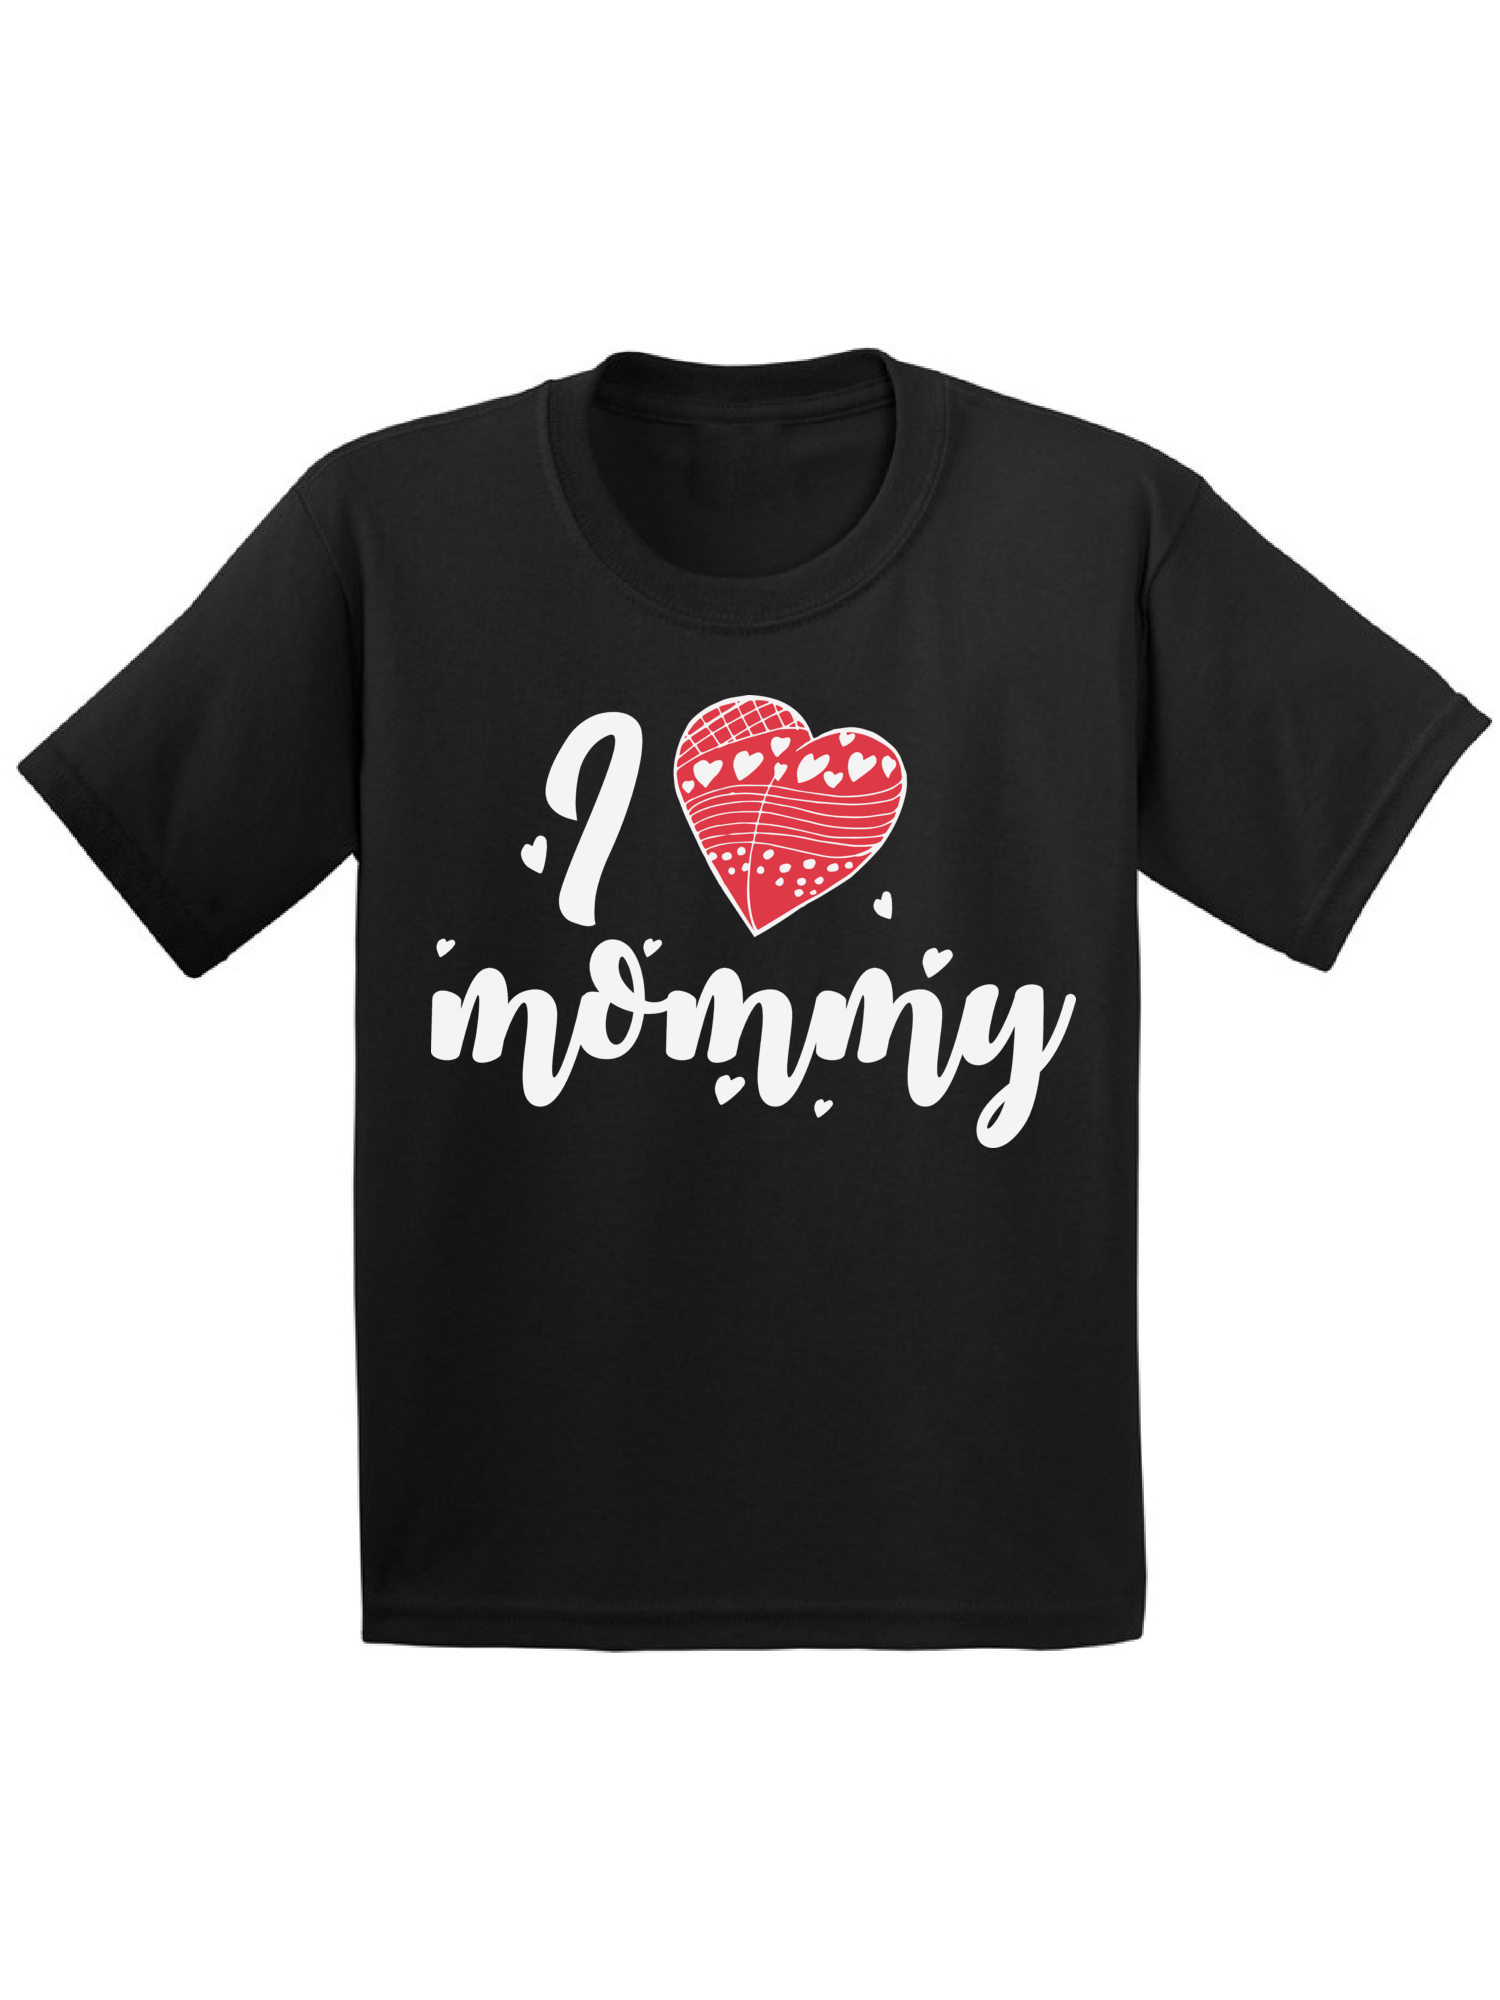 Awkward Styles I Love Mommy Infant Shirt Red Heart Tshirt Shirts for Boy Shirts for Girls Cute T-shirt for Girls Cool T Shirts for Boys Gifts for Children Love Shirts Best Mom Ever T Shirt for Kids - image 1 of 4